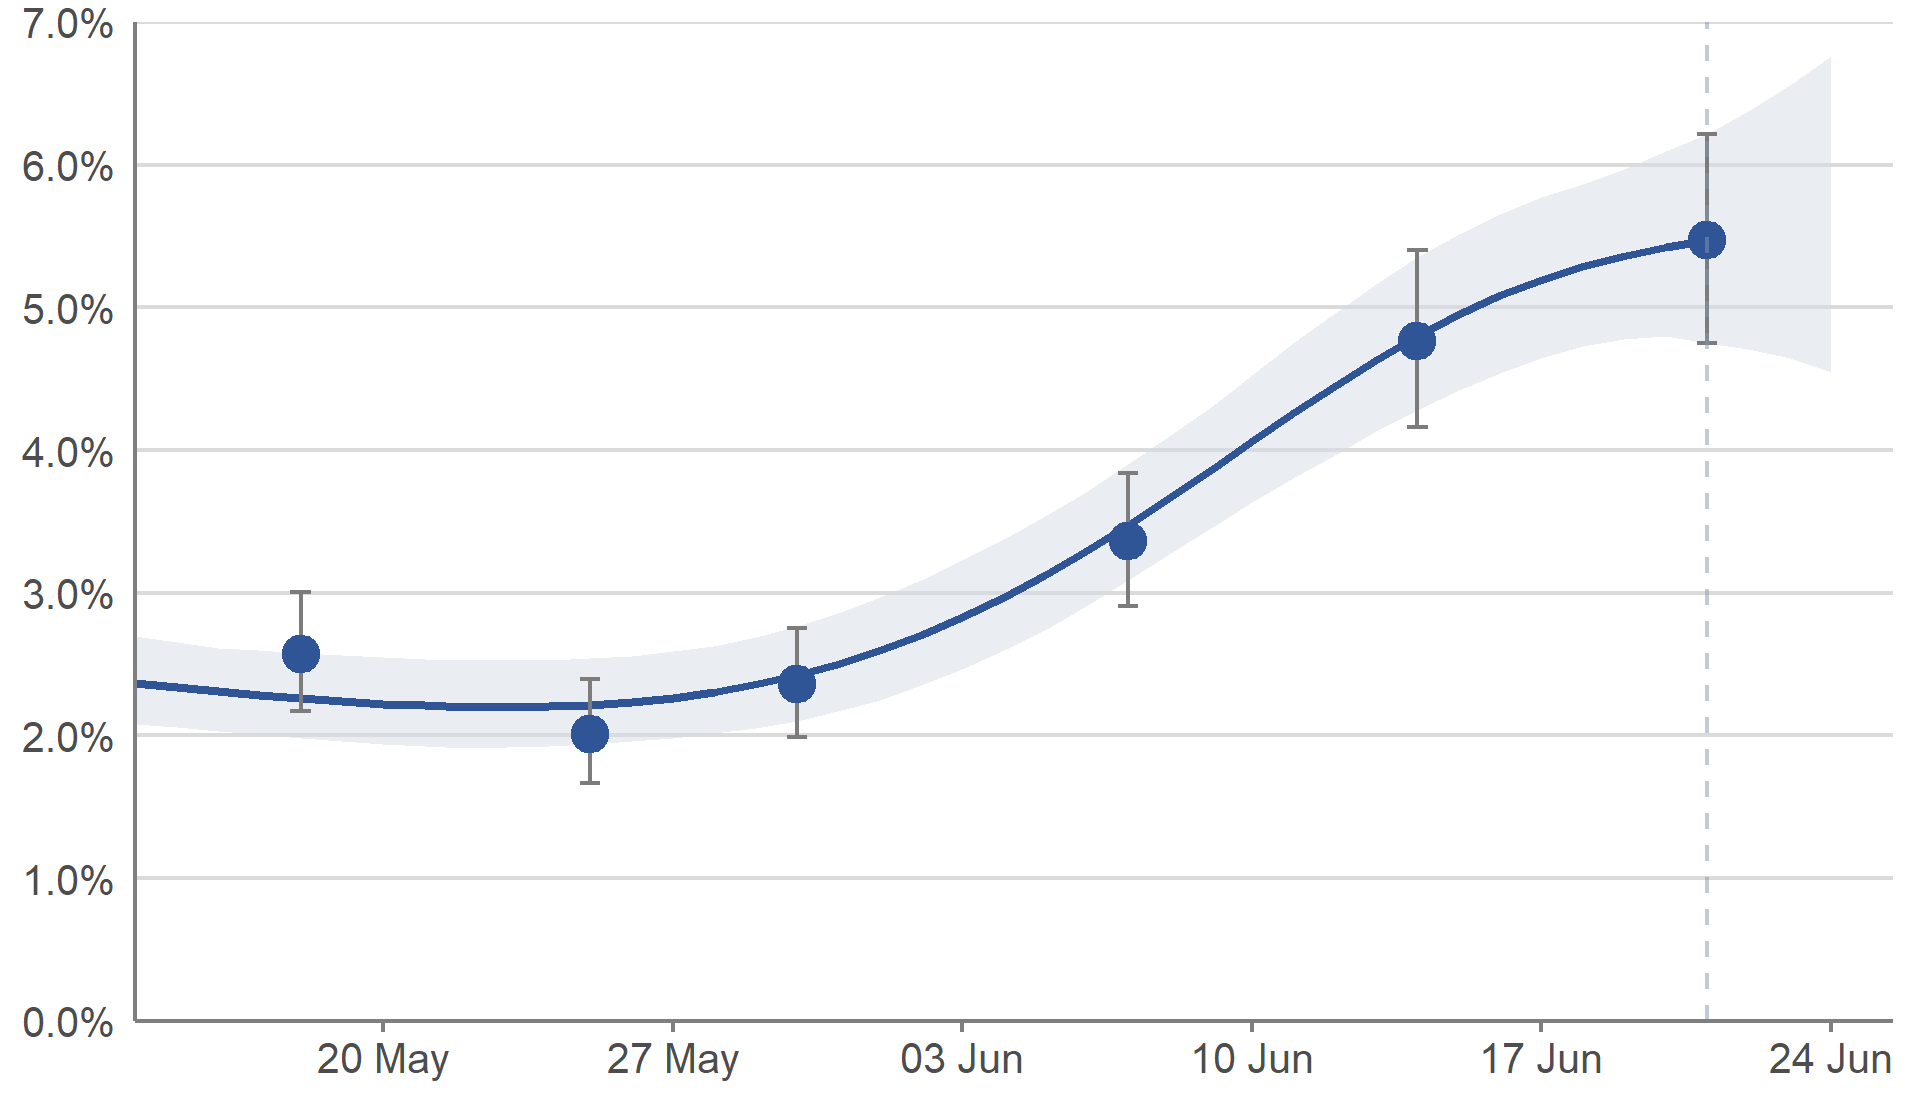 A chart showing estimates of the percentage of the population in Scotland testing positive for COVID-19 between 14 May and 24 June 2022. Modelled daily estimates are represented by a blue line with 95% credible intervals in pale blue shading, and official reported weekly estimates are represented by blue dots with whiskers showing the 95% credible intervals. A vertical dashed line near the end of the series indicates greater uncertainty in estimates for the last three reported days. The estimated percentage of people testing positive for COVID-19 continued to increase in the most recent week.